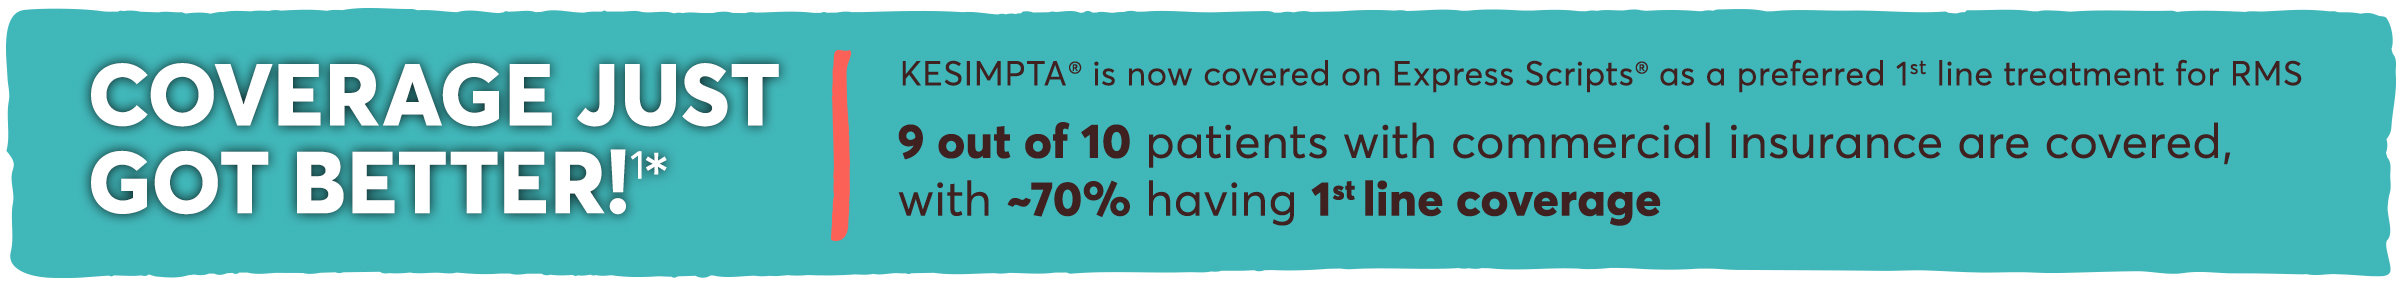 KESIMPTA is now a preferred first-line treatment on Express Scripts®. 93% of all patients with commercial insurance are covered, and 67% have first-line coverage.